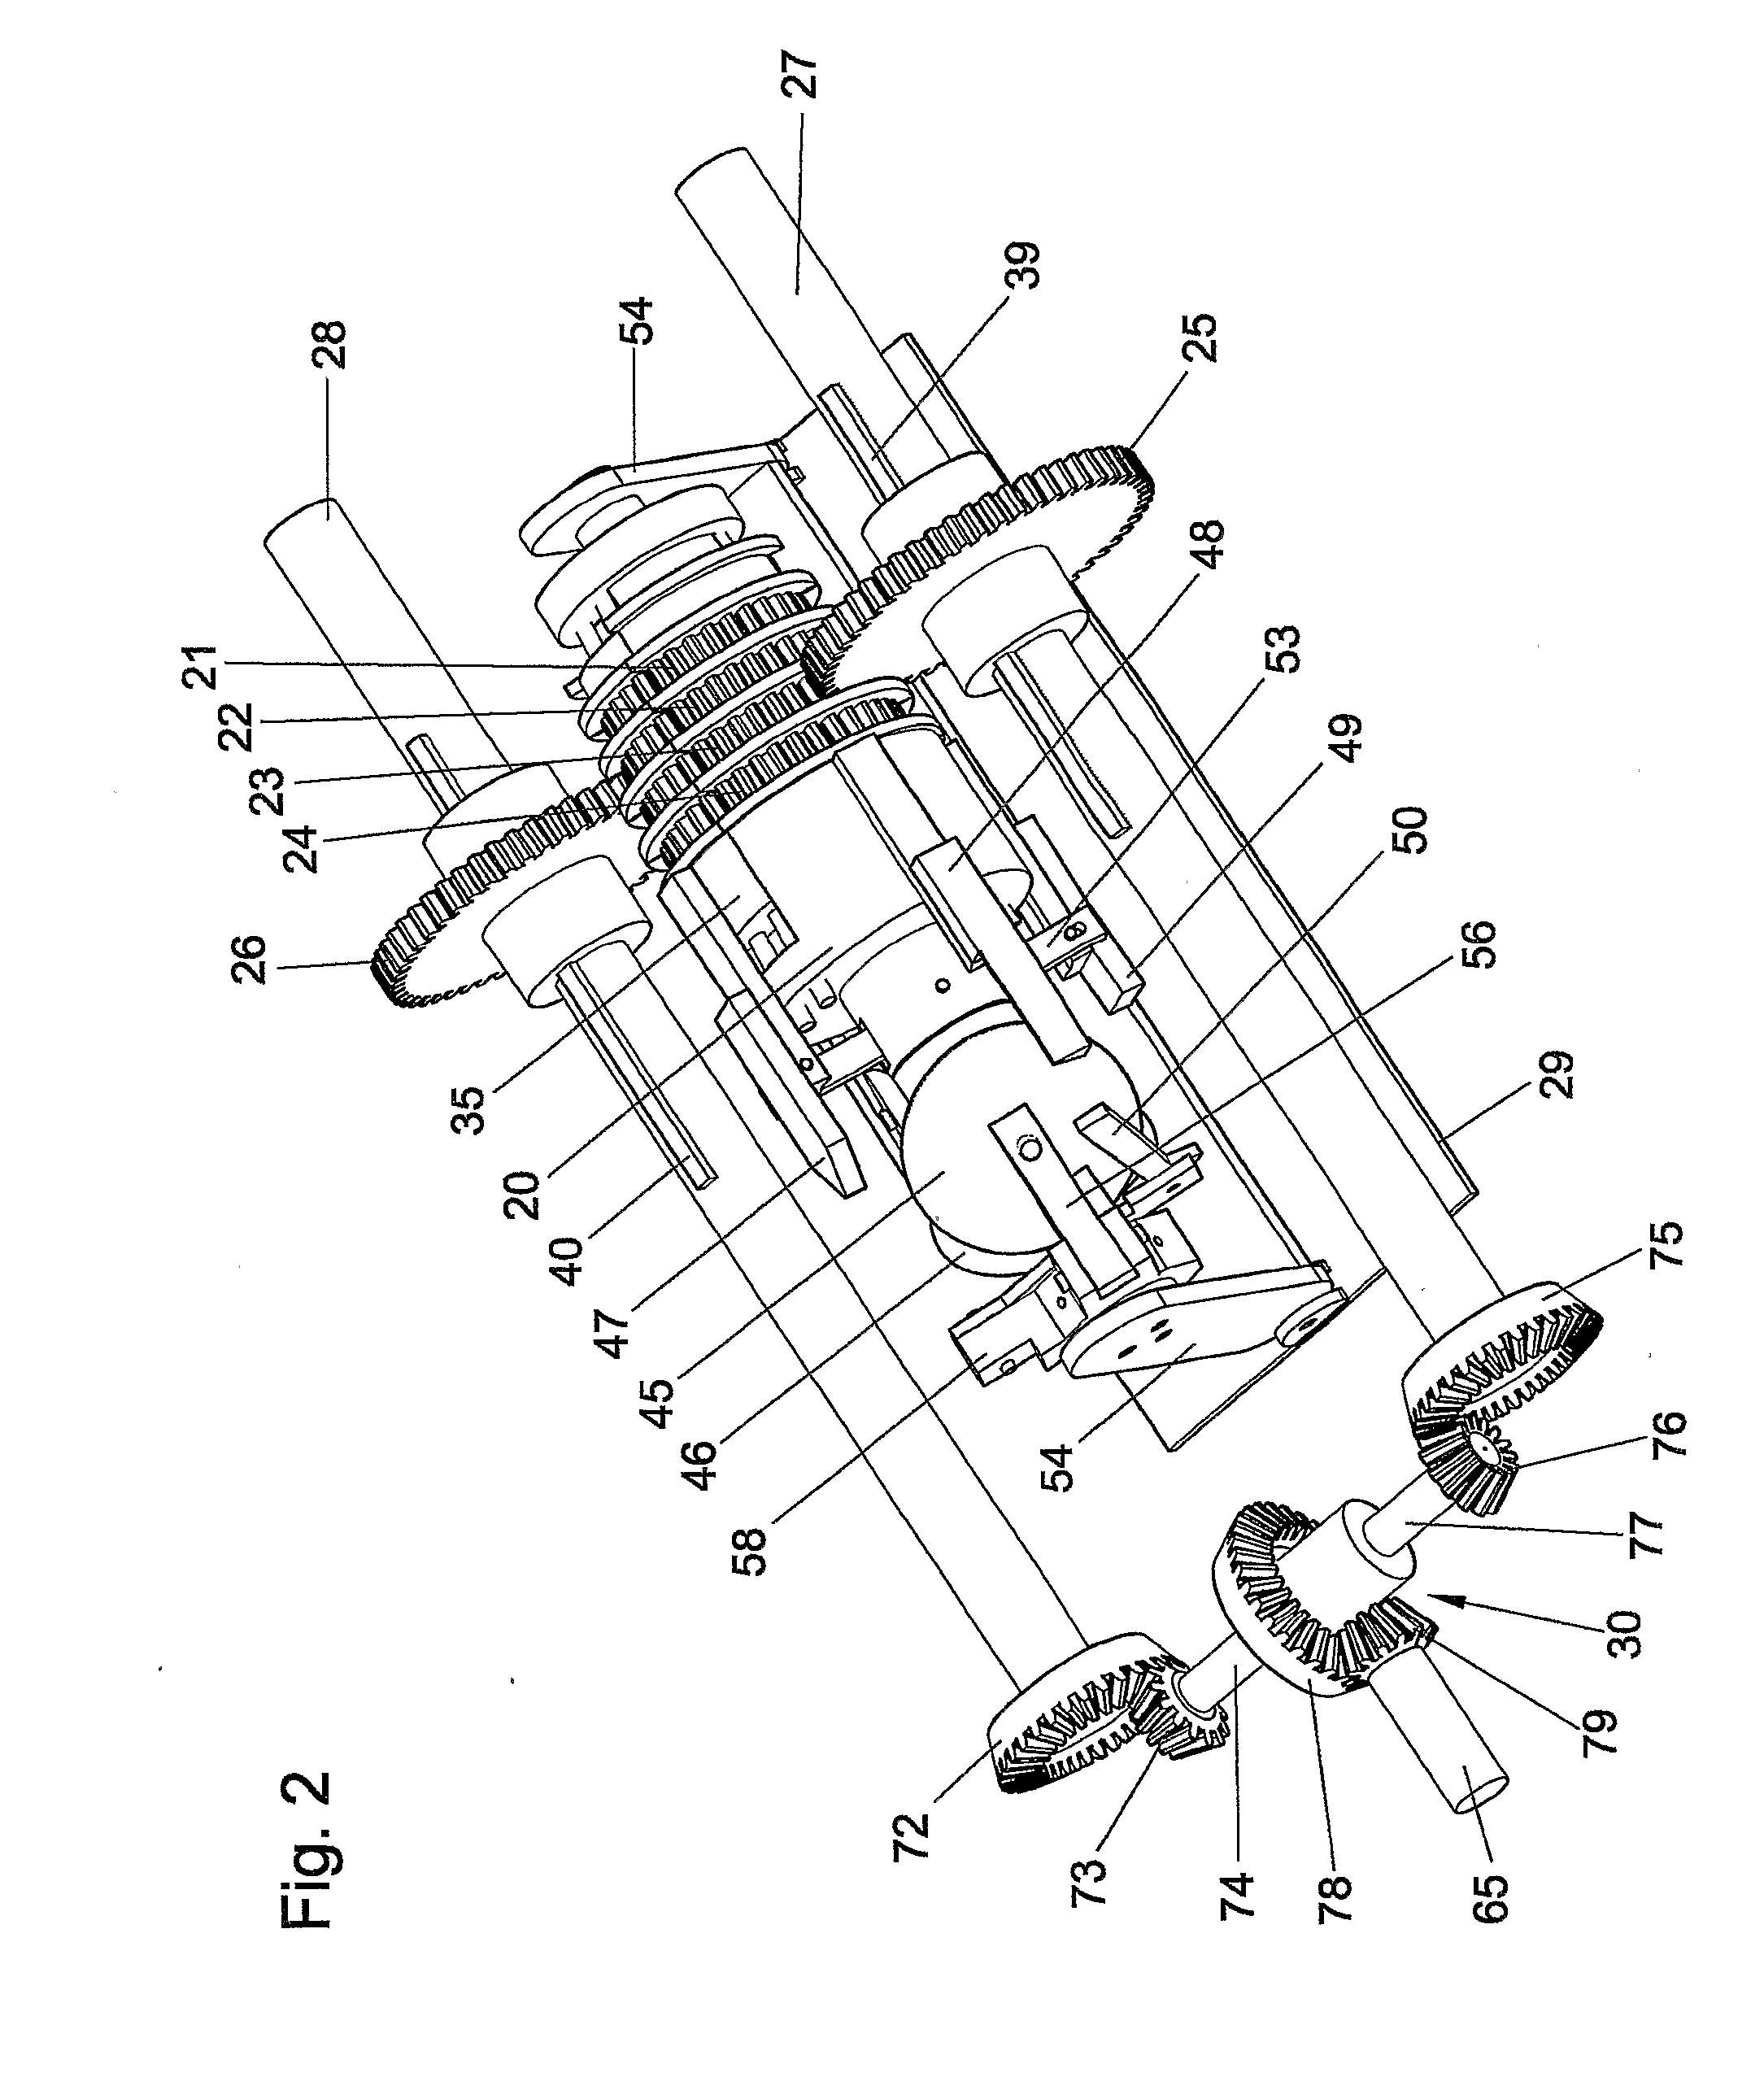 Gear-based continuously engaged variable transmission